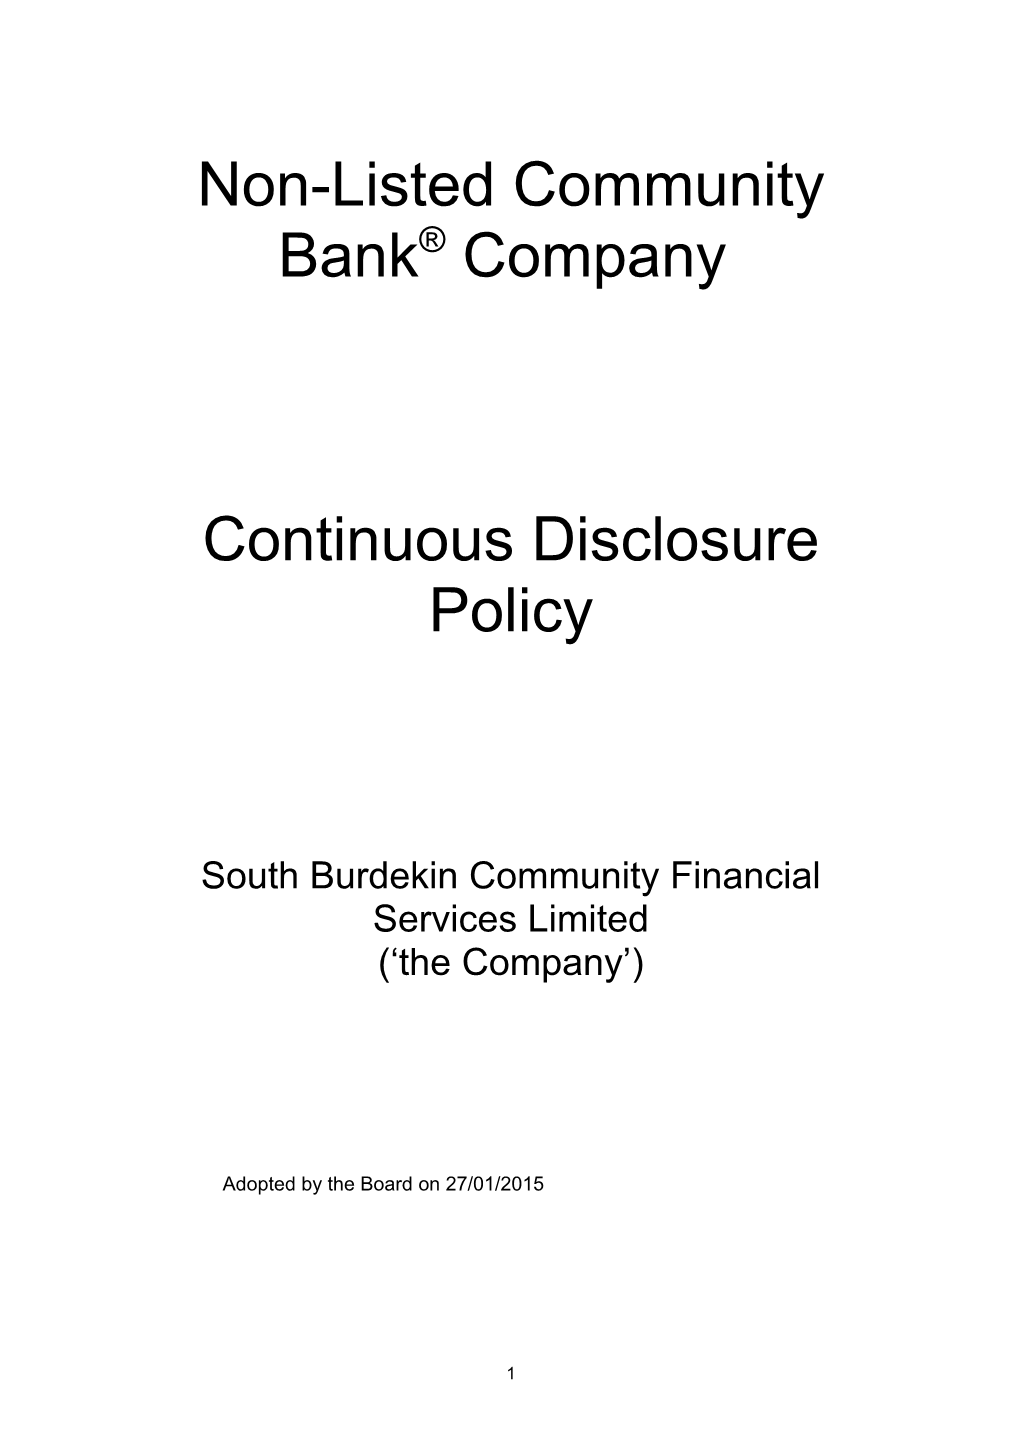 Non-Listed Listed Entity Continuous Disclosure Policy